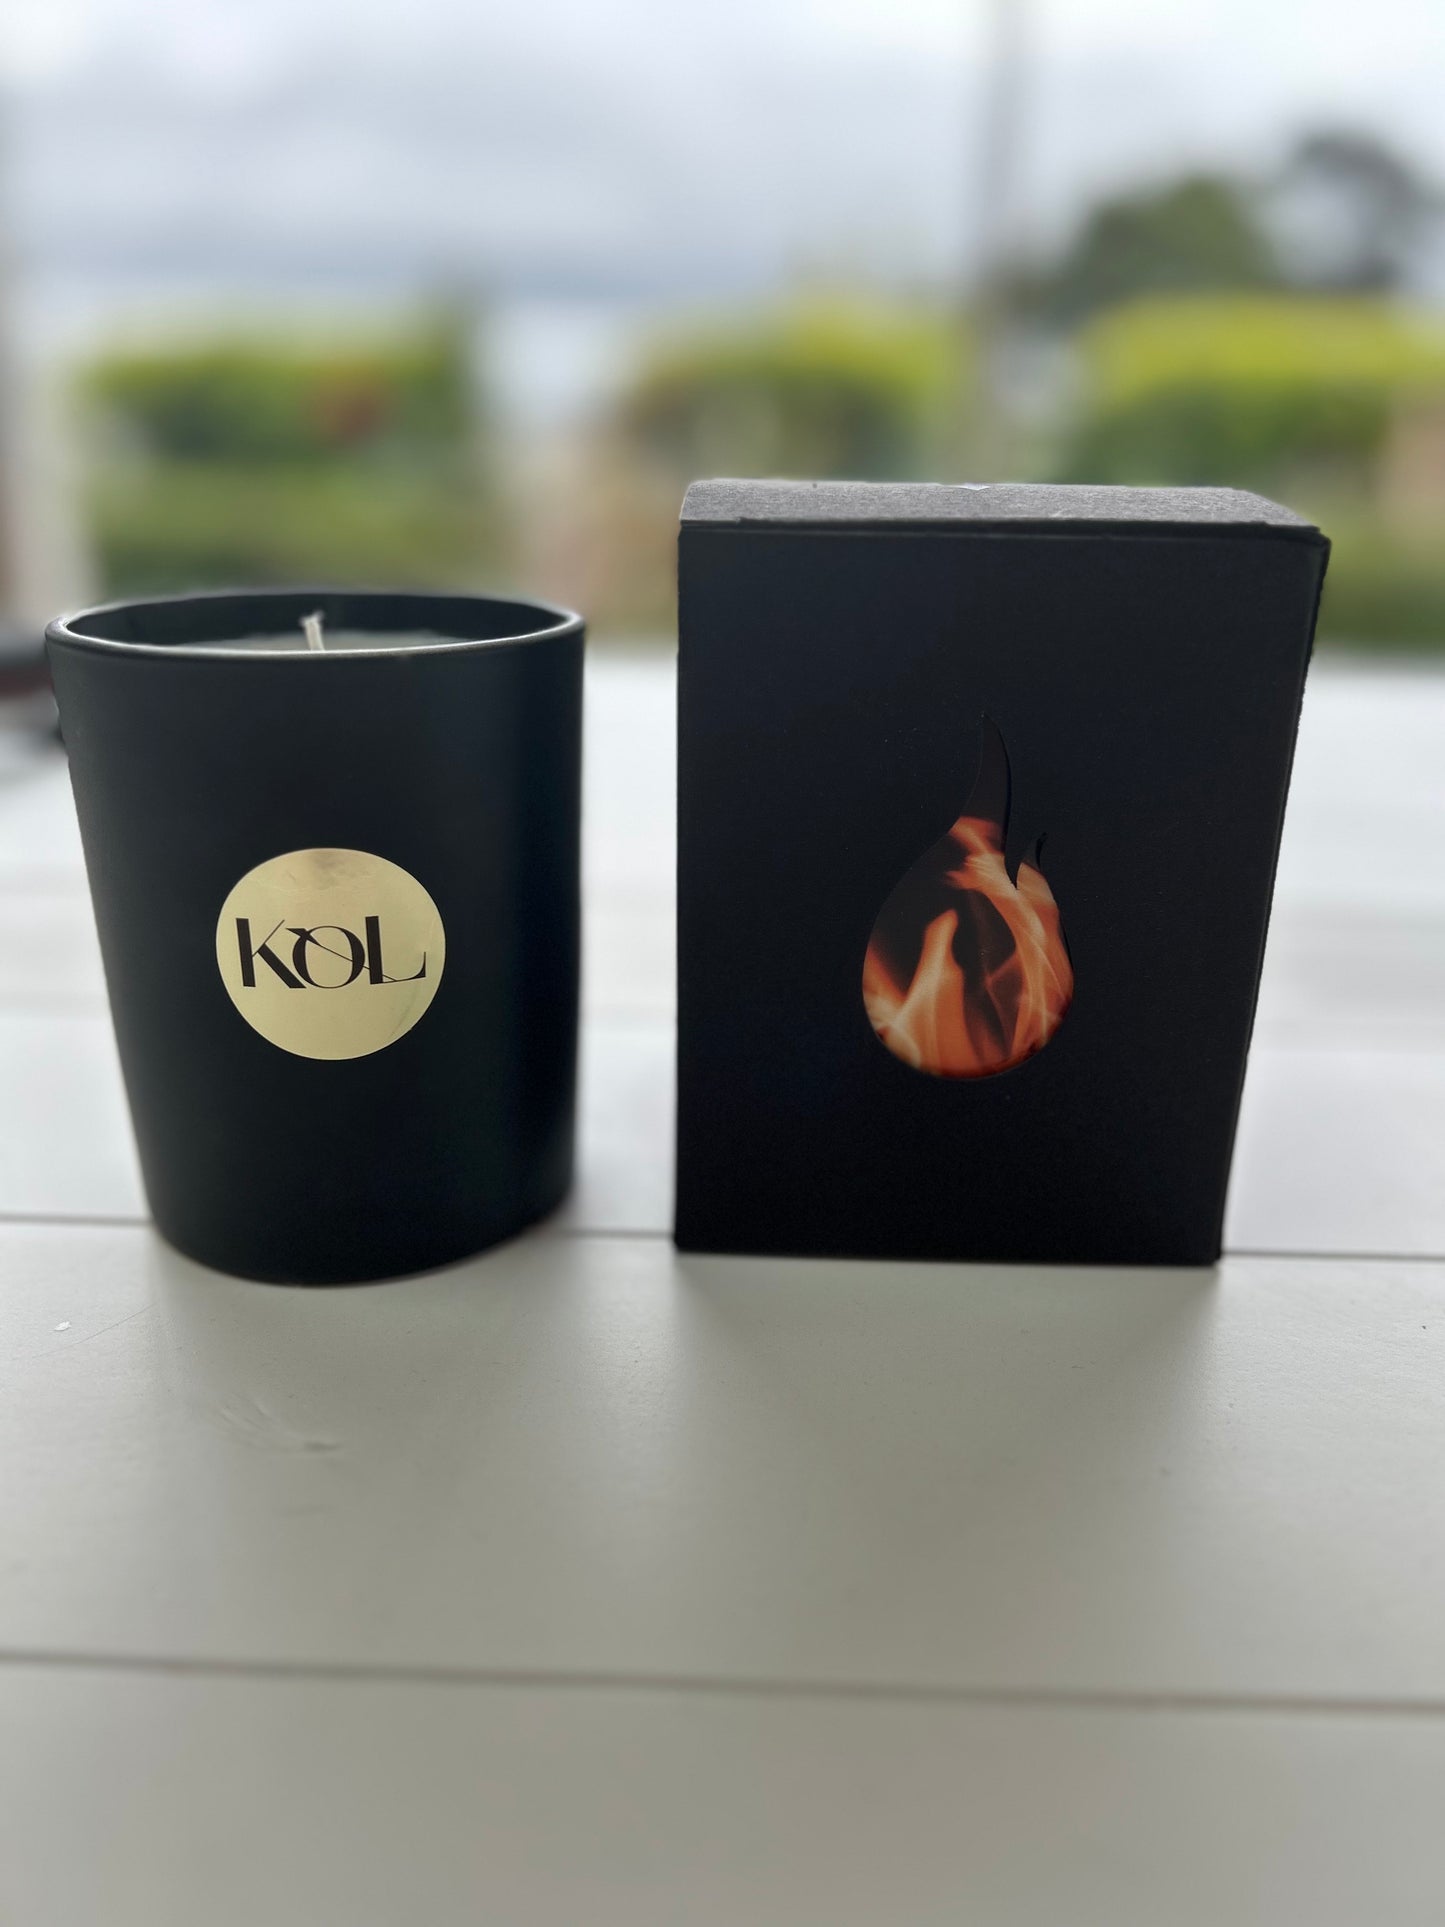 "Ember" candle by KOL